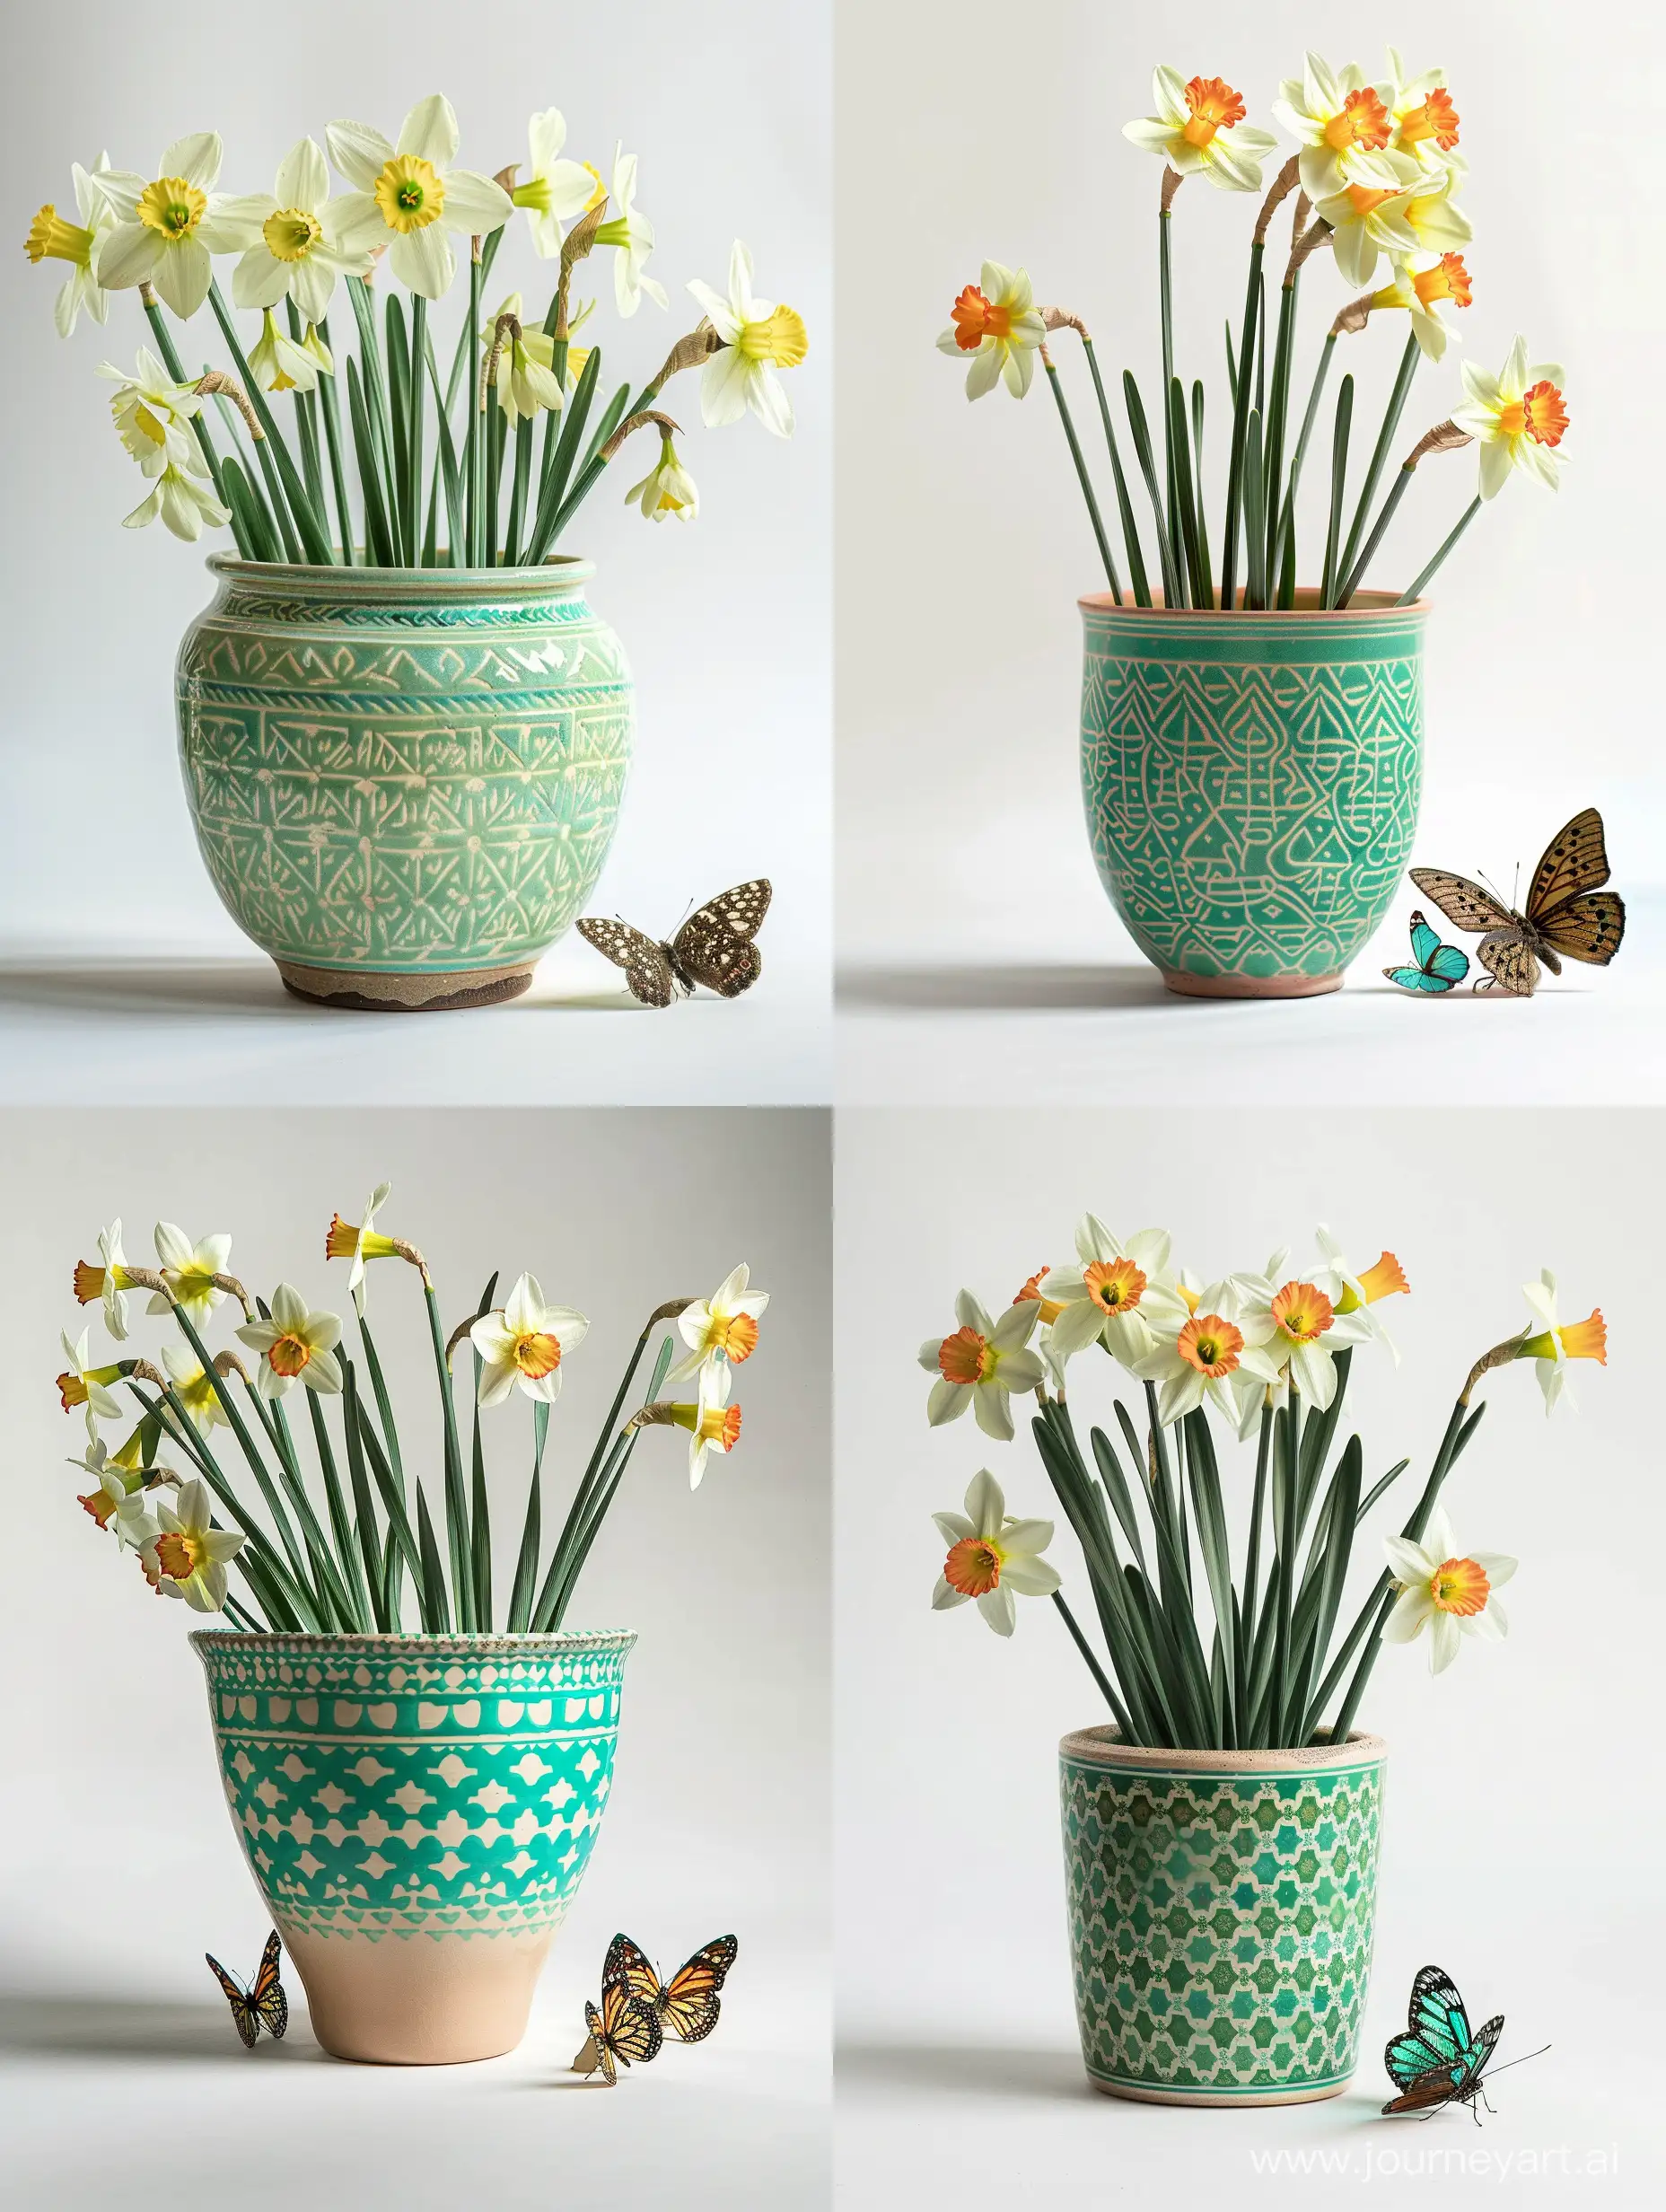 Exquisite-Iranian-Ceramic-Pot-with-Turquoise-Narcissus-Flowers-and-Butterflies